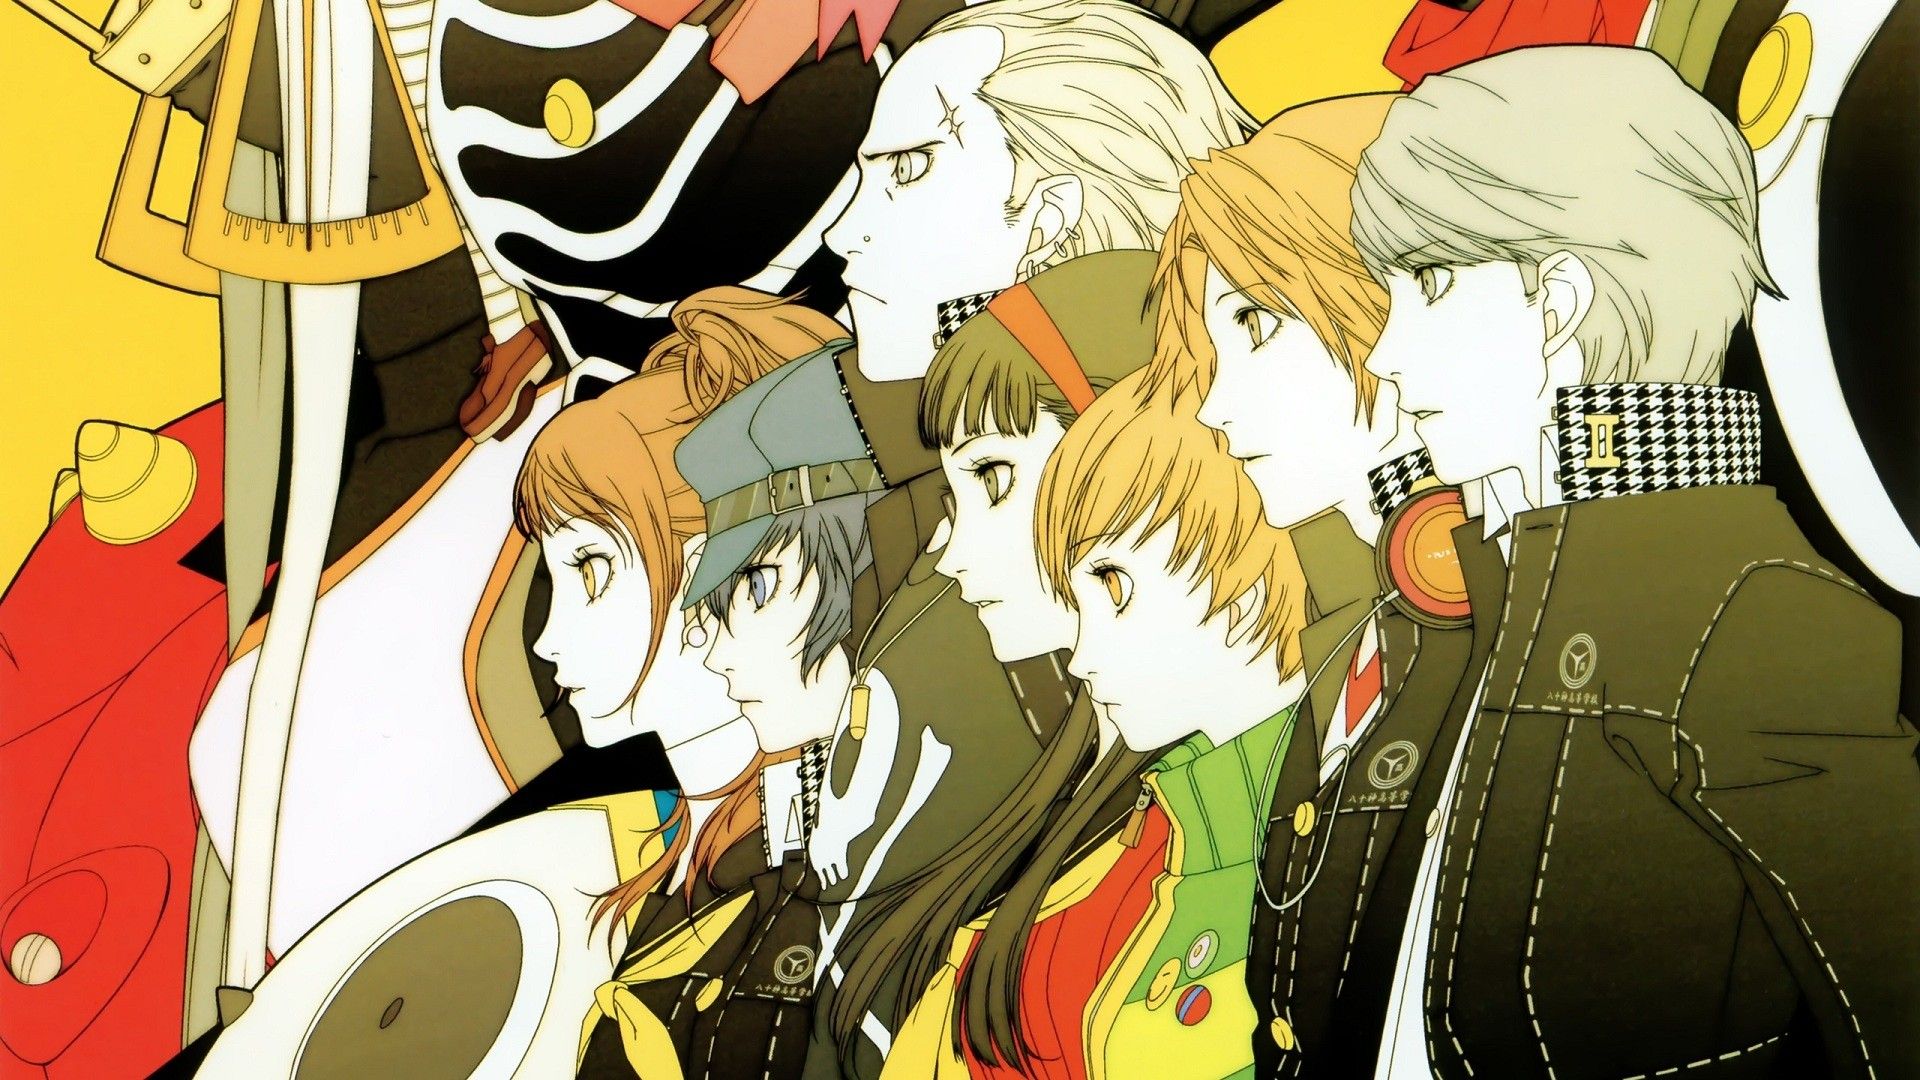 Tested: Persona 4 Golden's PC port looks sharp and even runs